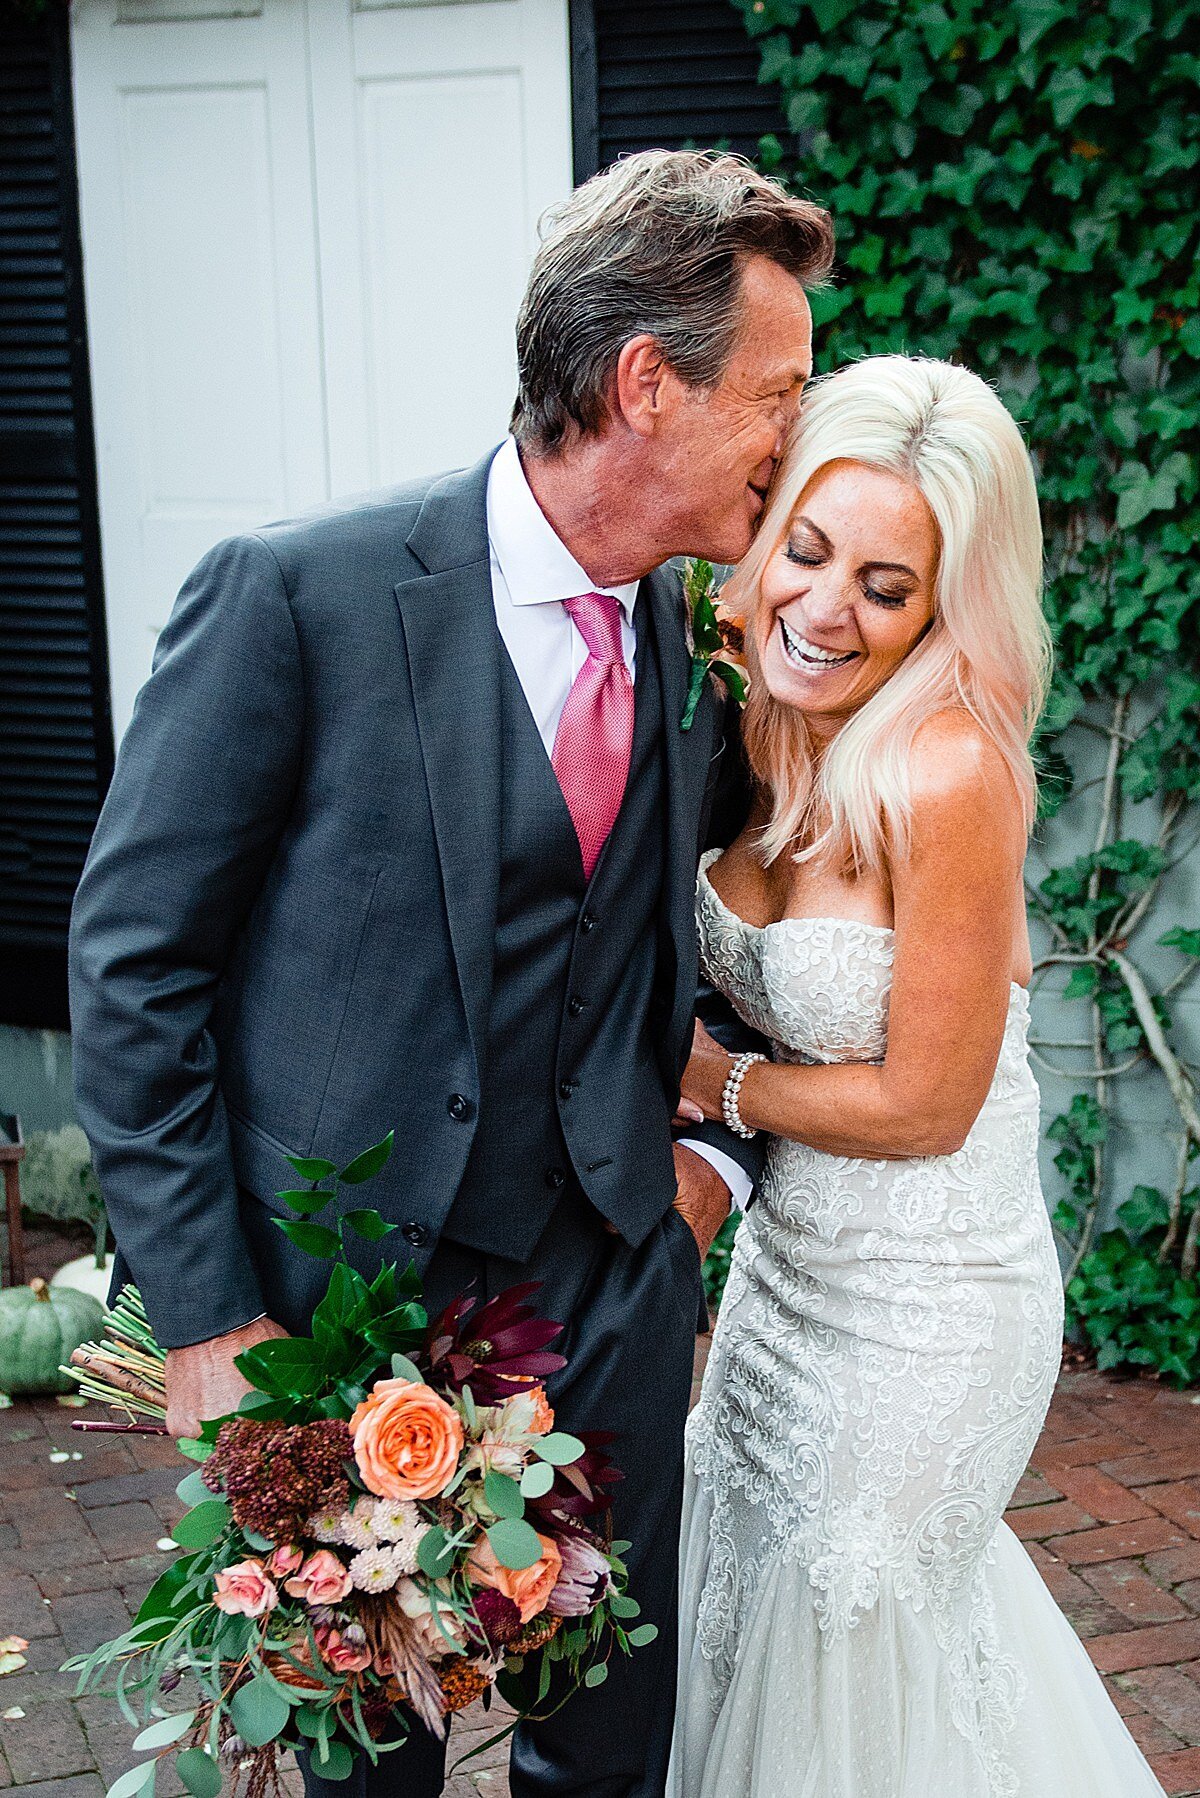 The groom, wearing a three piece navy suit and pink tie with a white shirt holds the brides bouquet as he whispers in her ear. The bride, looking down at the bouquet, laughs.  The bride is wearing a strapless mermaid style wedding gown with lace detailing on the bodice. The skirt is sheer organza. They are standing in an ivy covered courtyard with a white door. The bridal bouquet is full of burgundy, peach, pink, blush and ivory flowers.